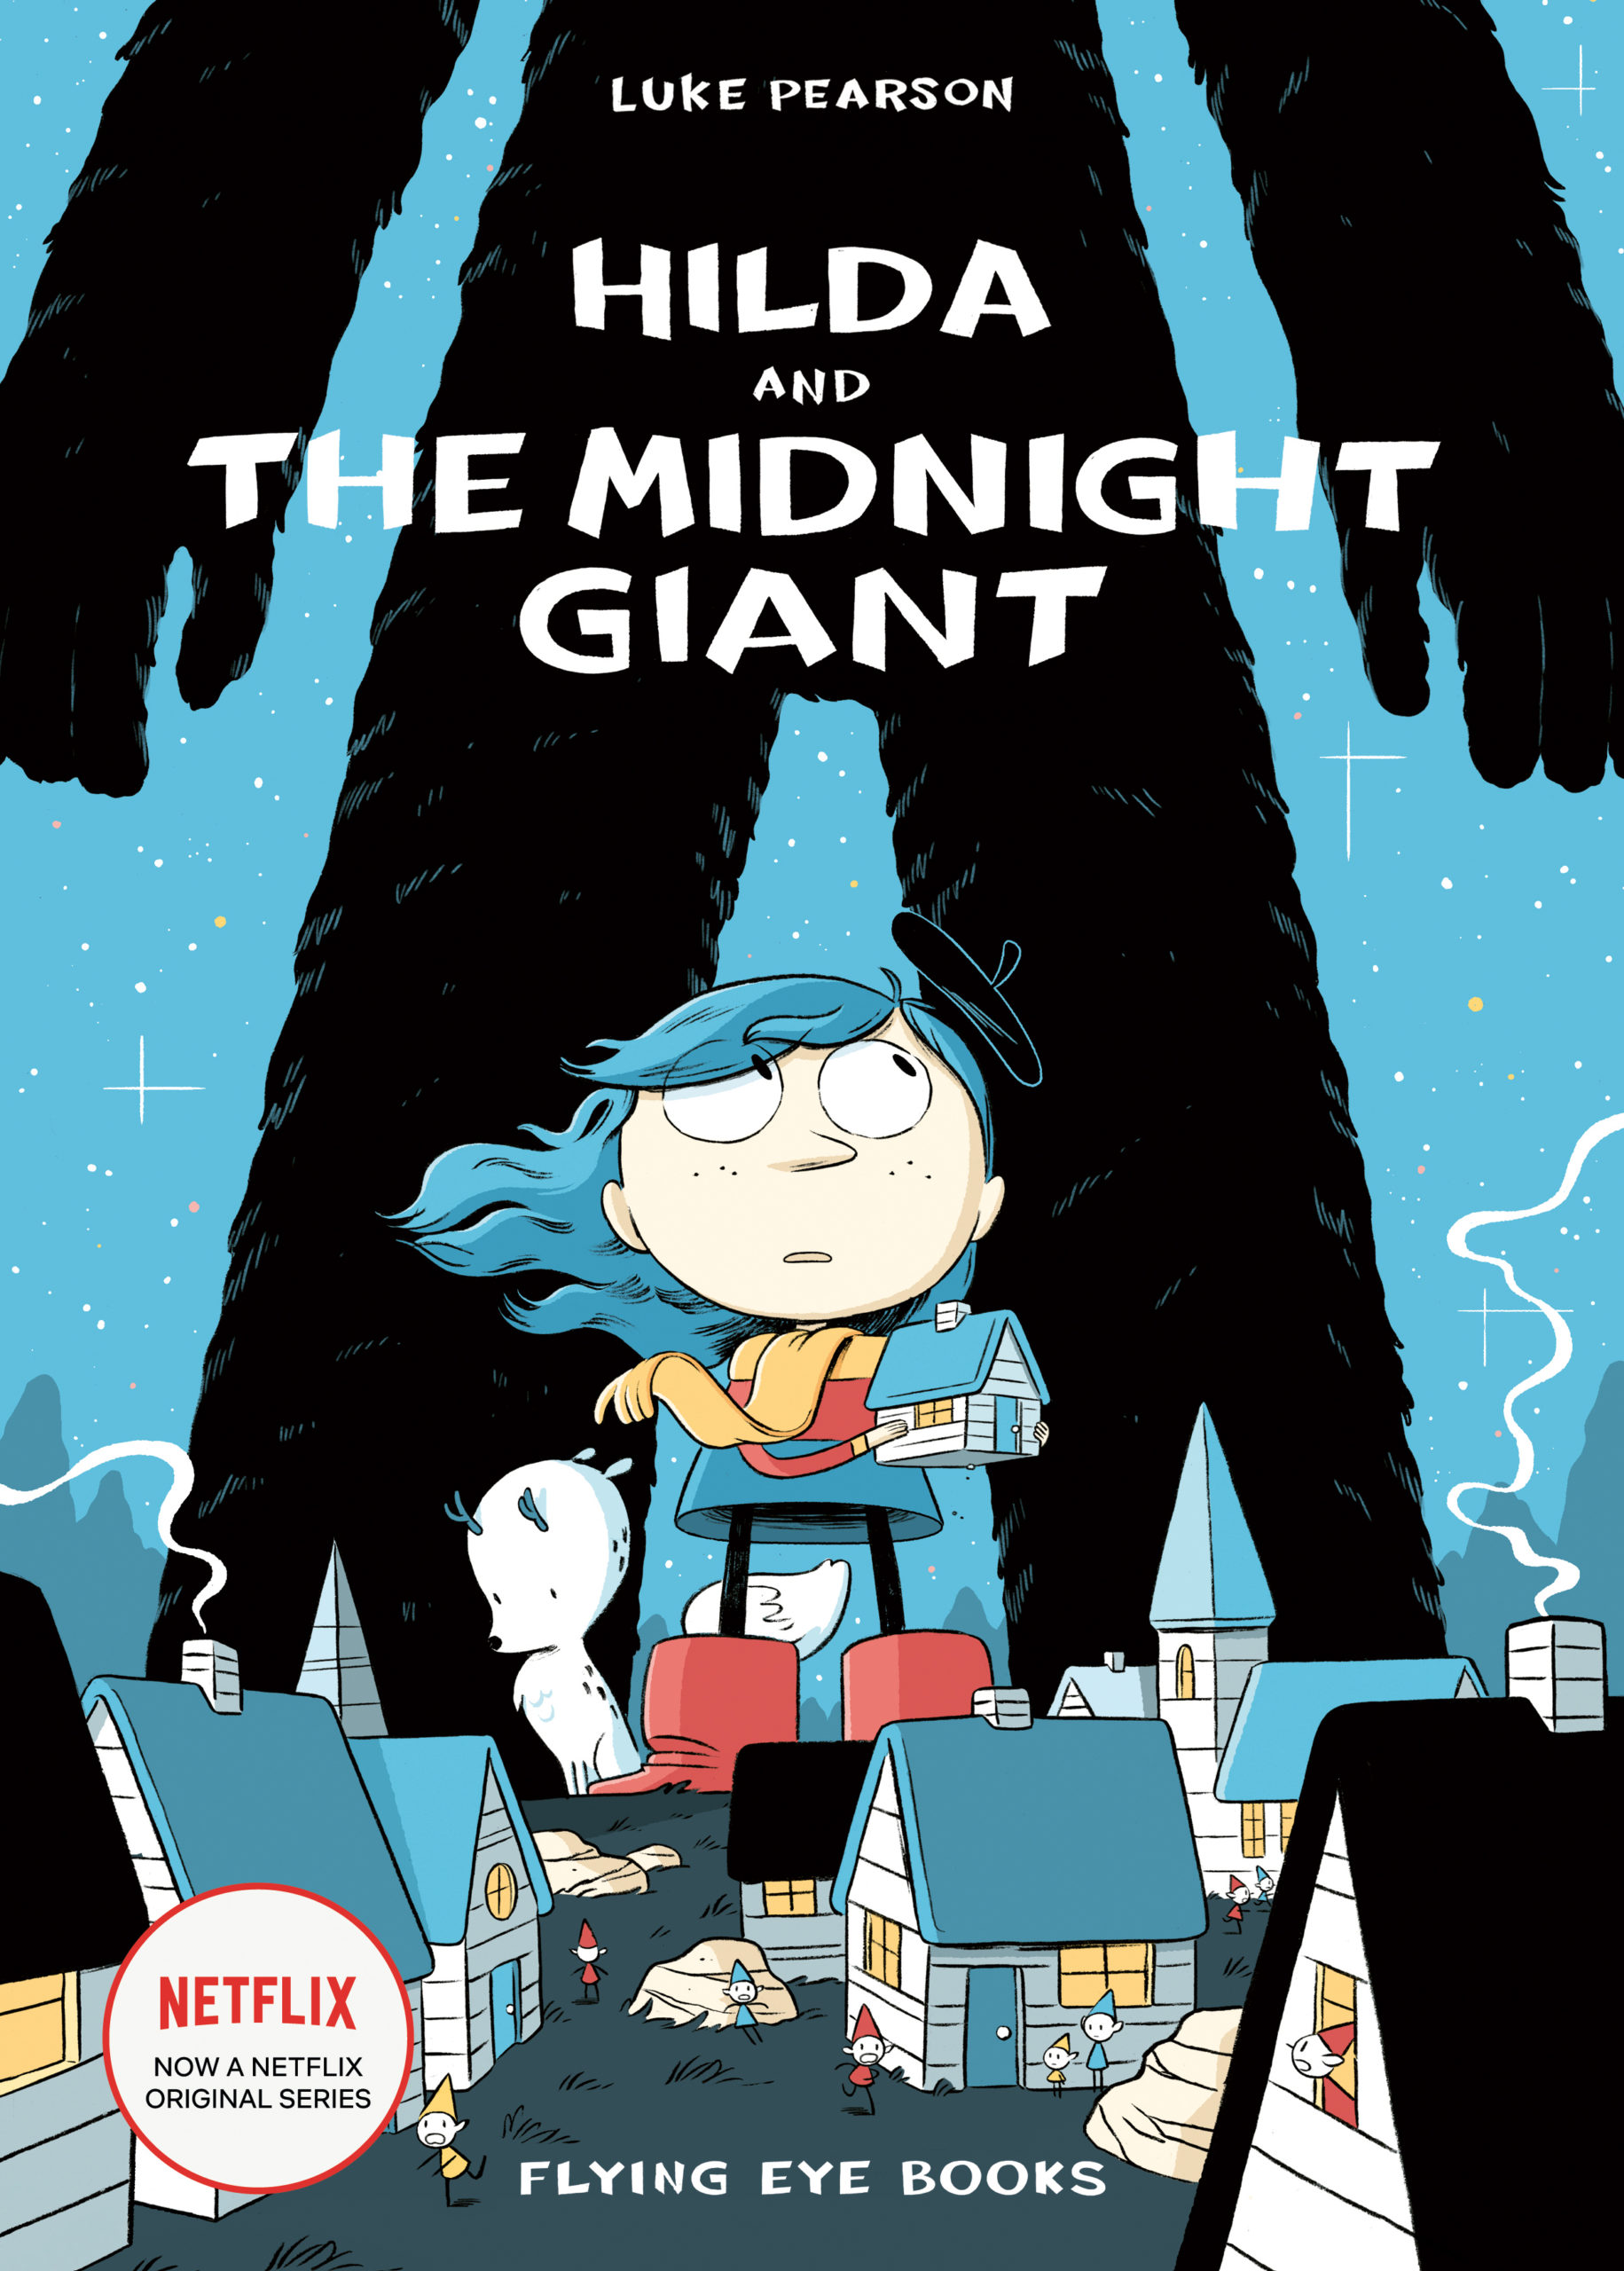 the　Midnight　Hilda　(Paperback)　Nobrow　–　Press　and　Giant